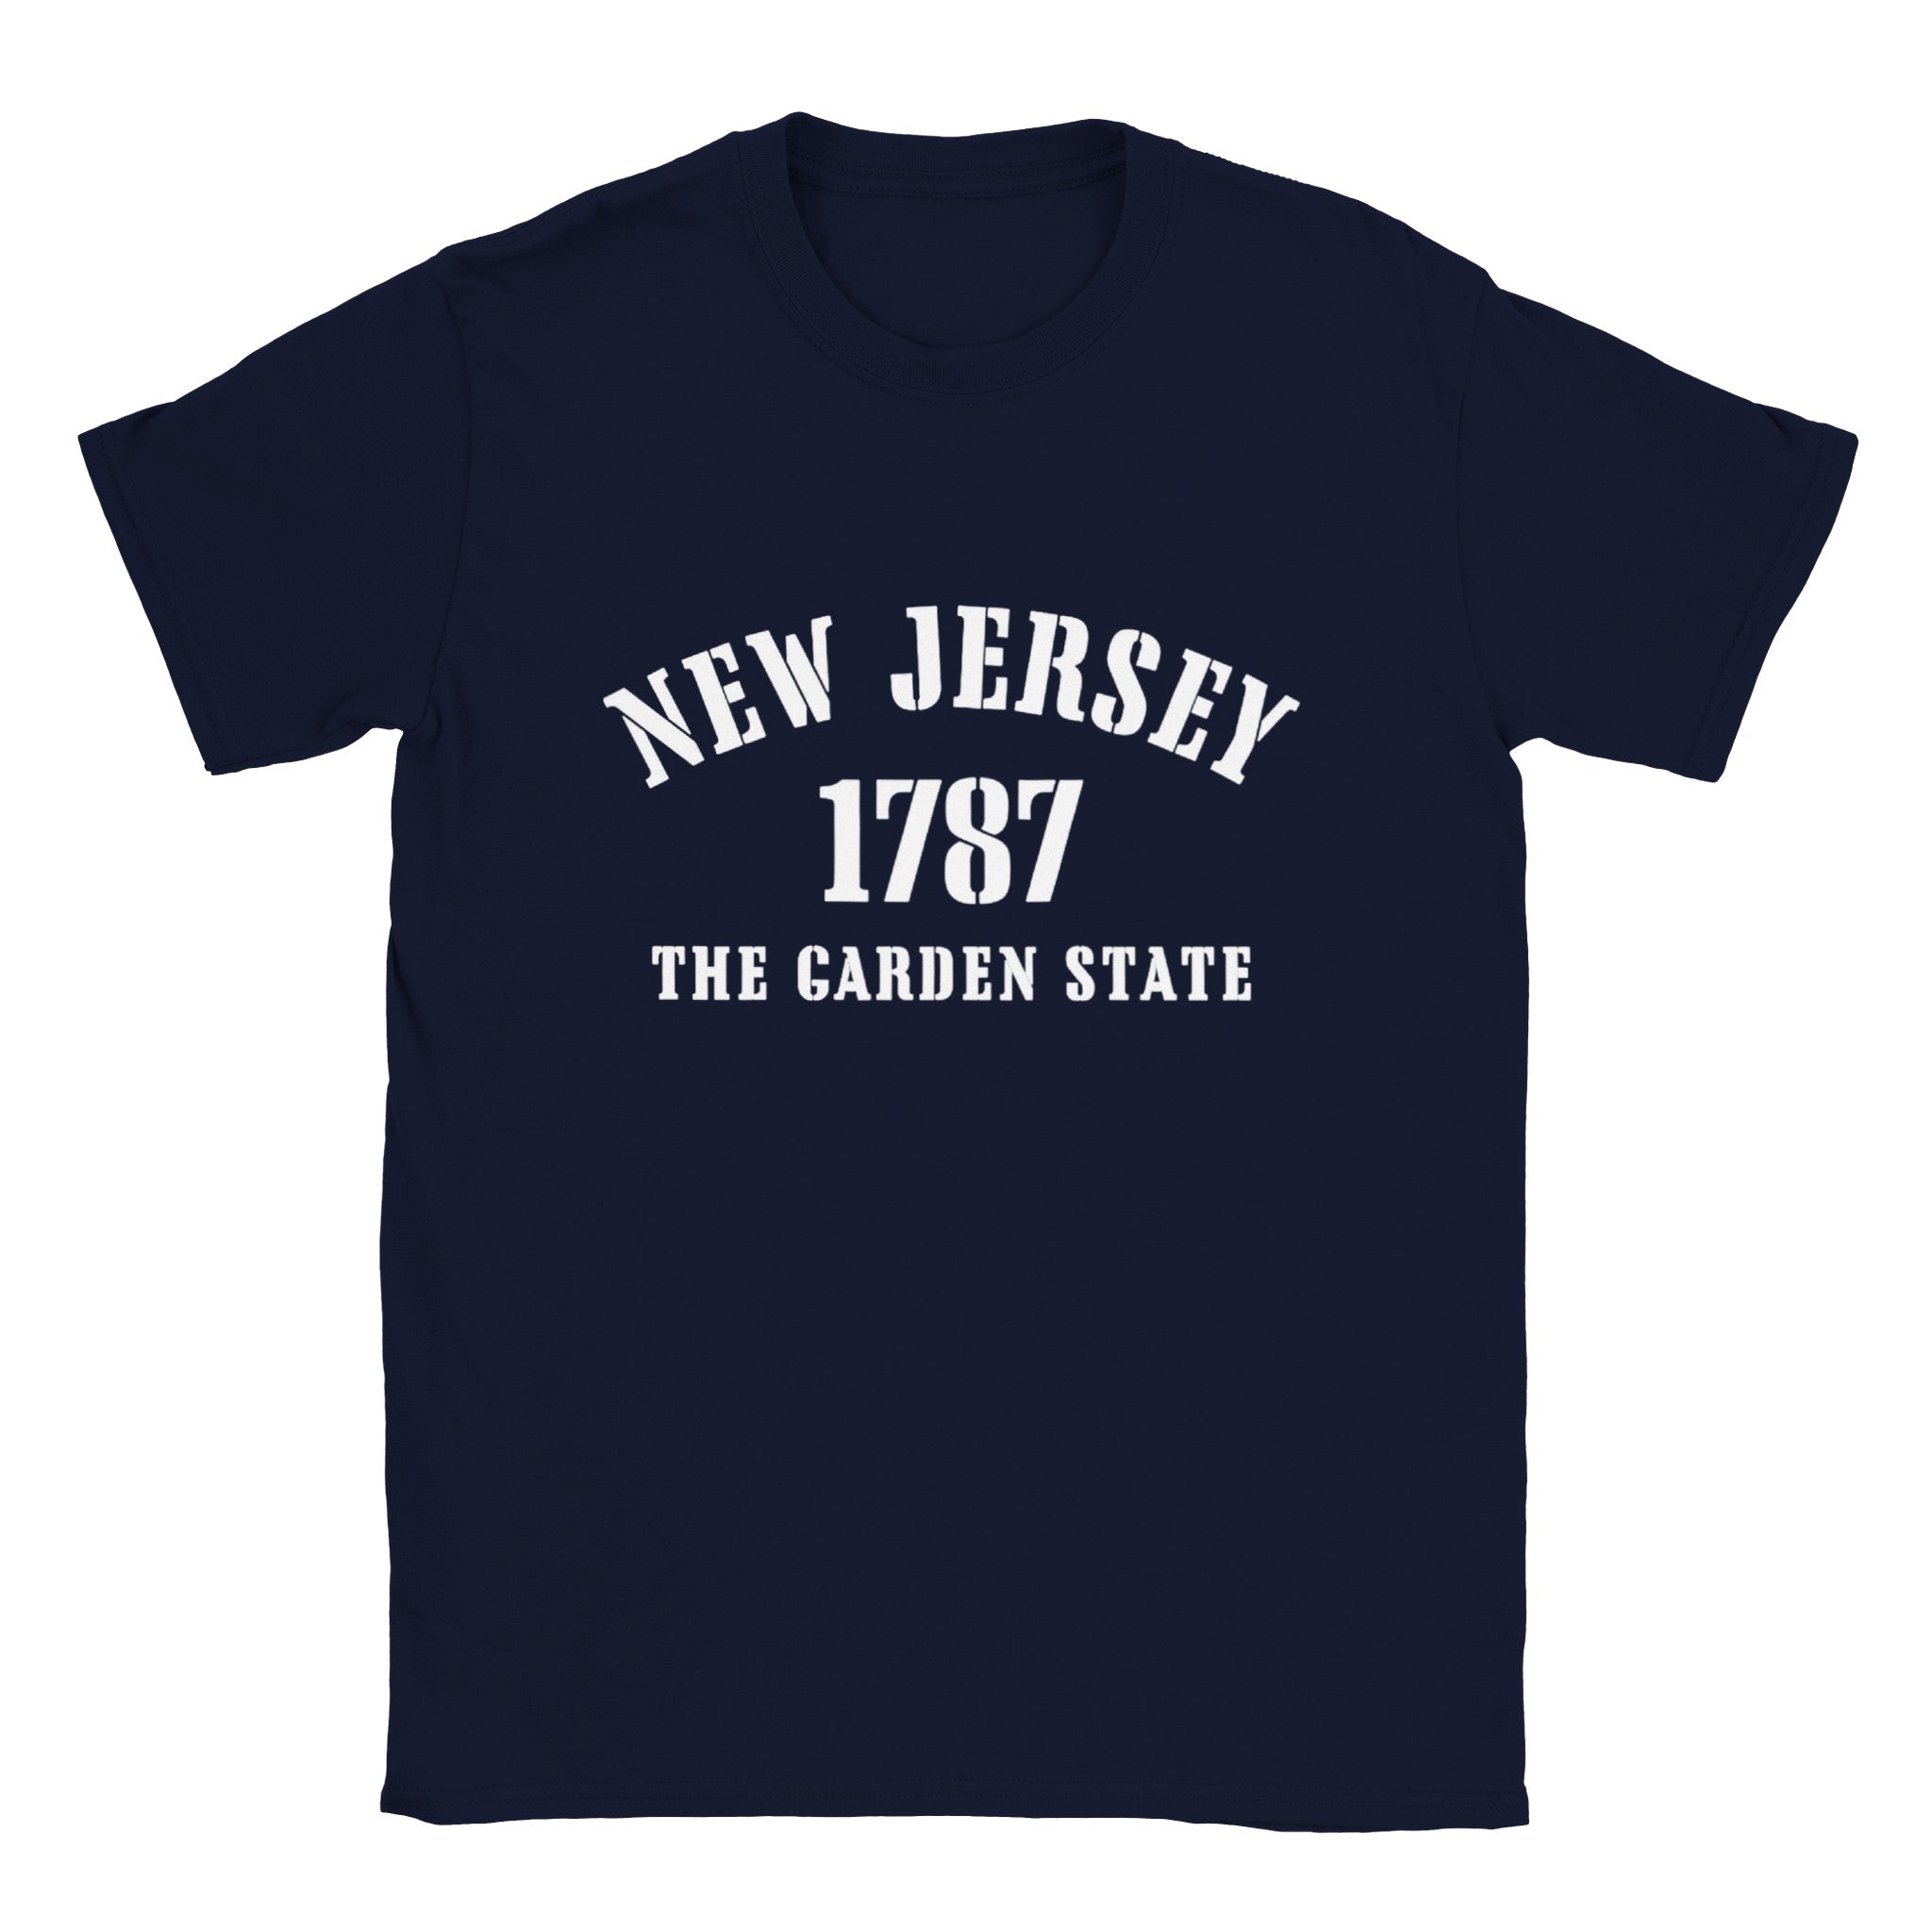 New Jersey- Classic Unisex Crewneck States T-shirt - Creations by Chris and Carlos